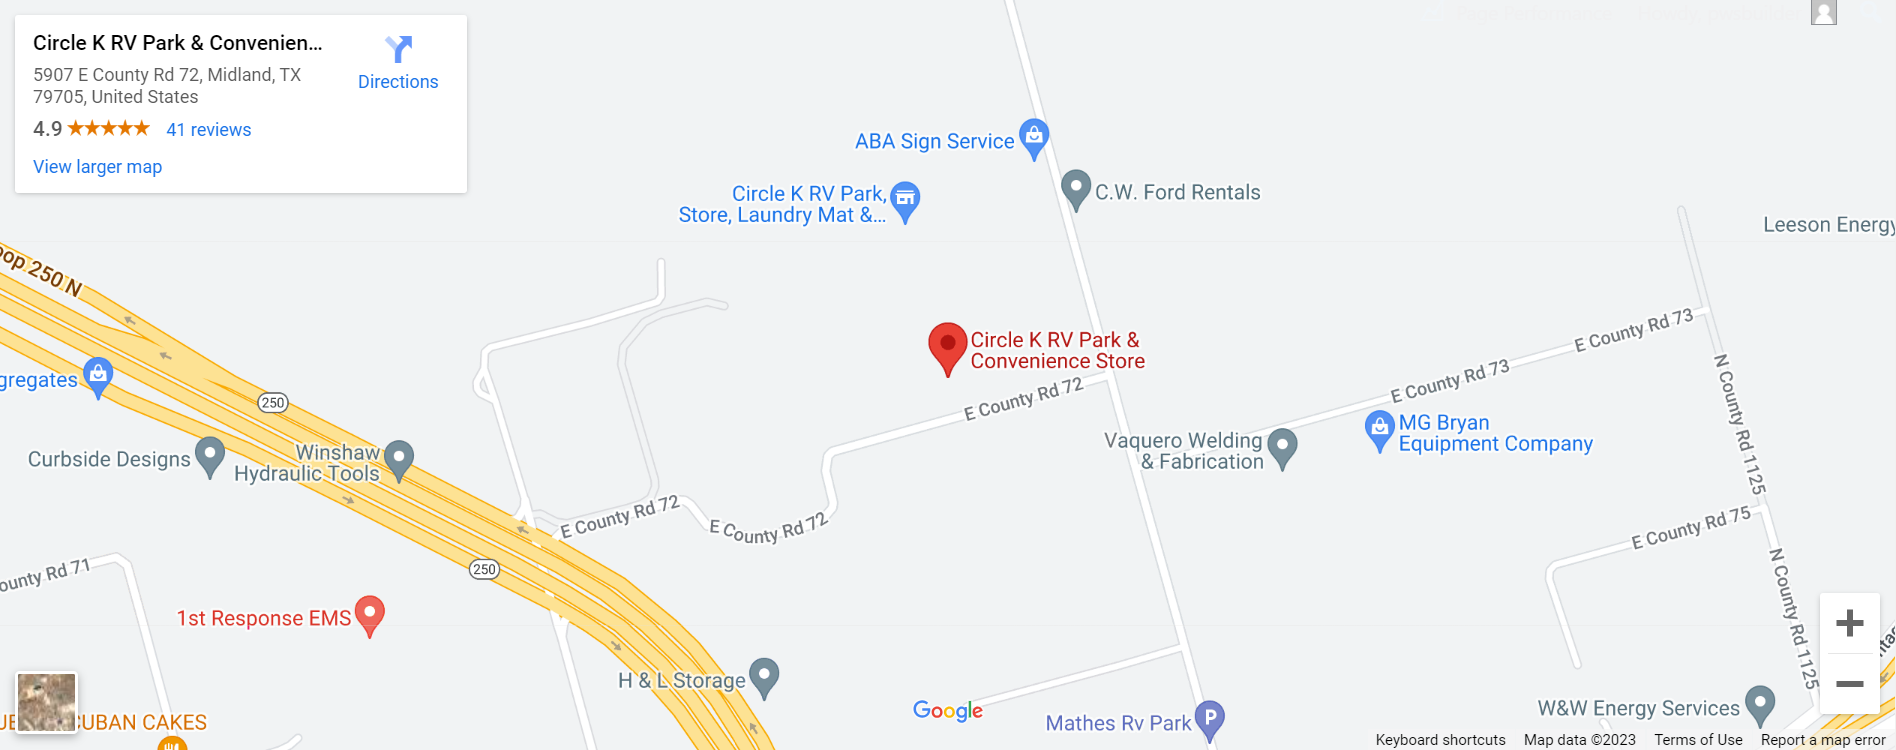 A map of the location of circle k rv park & convenience store.